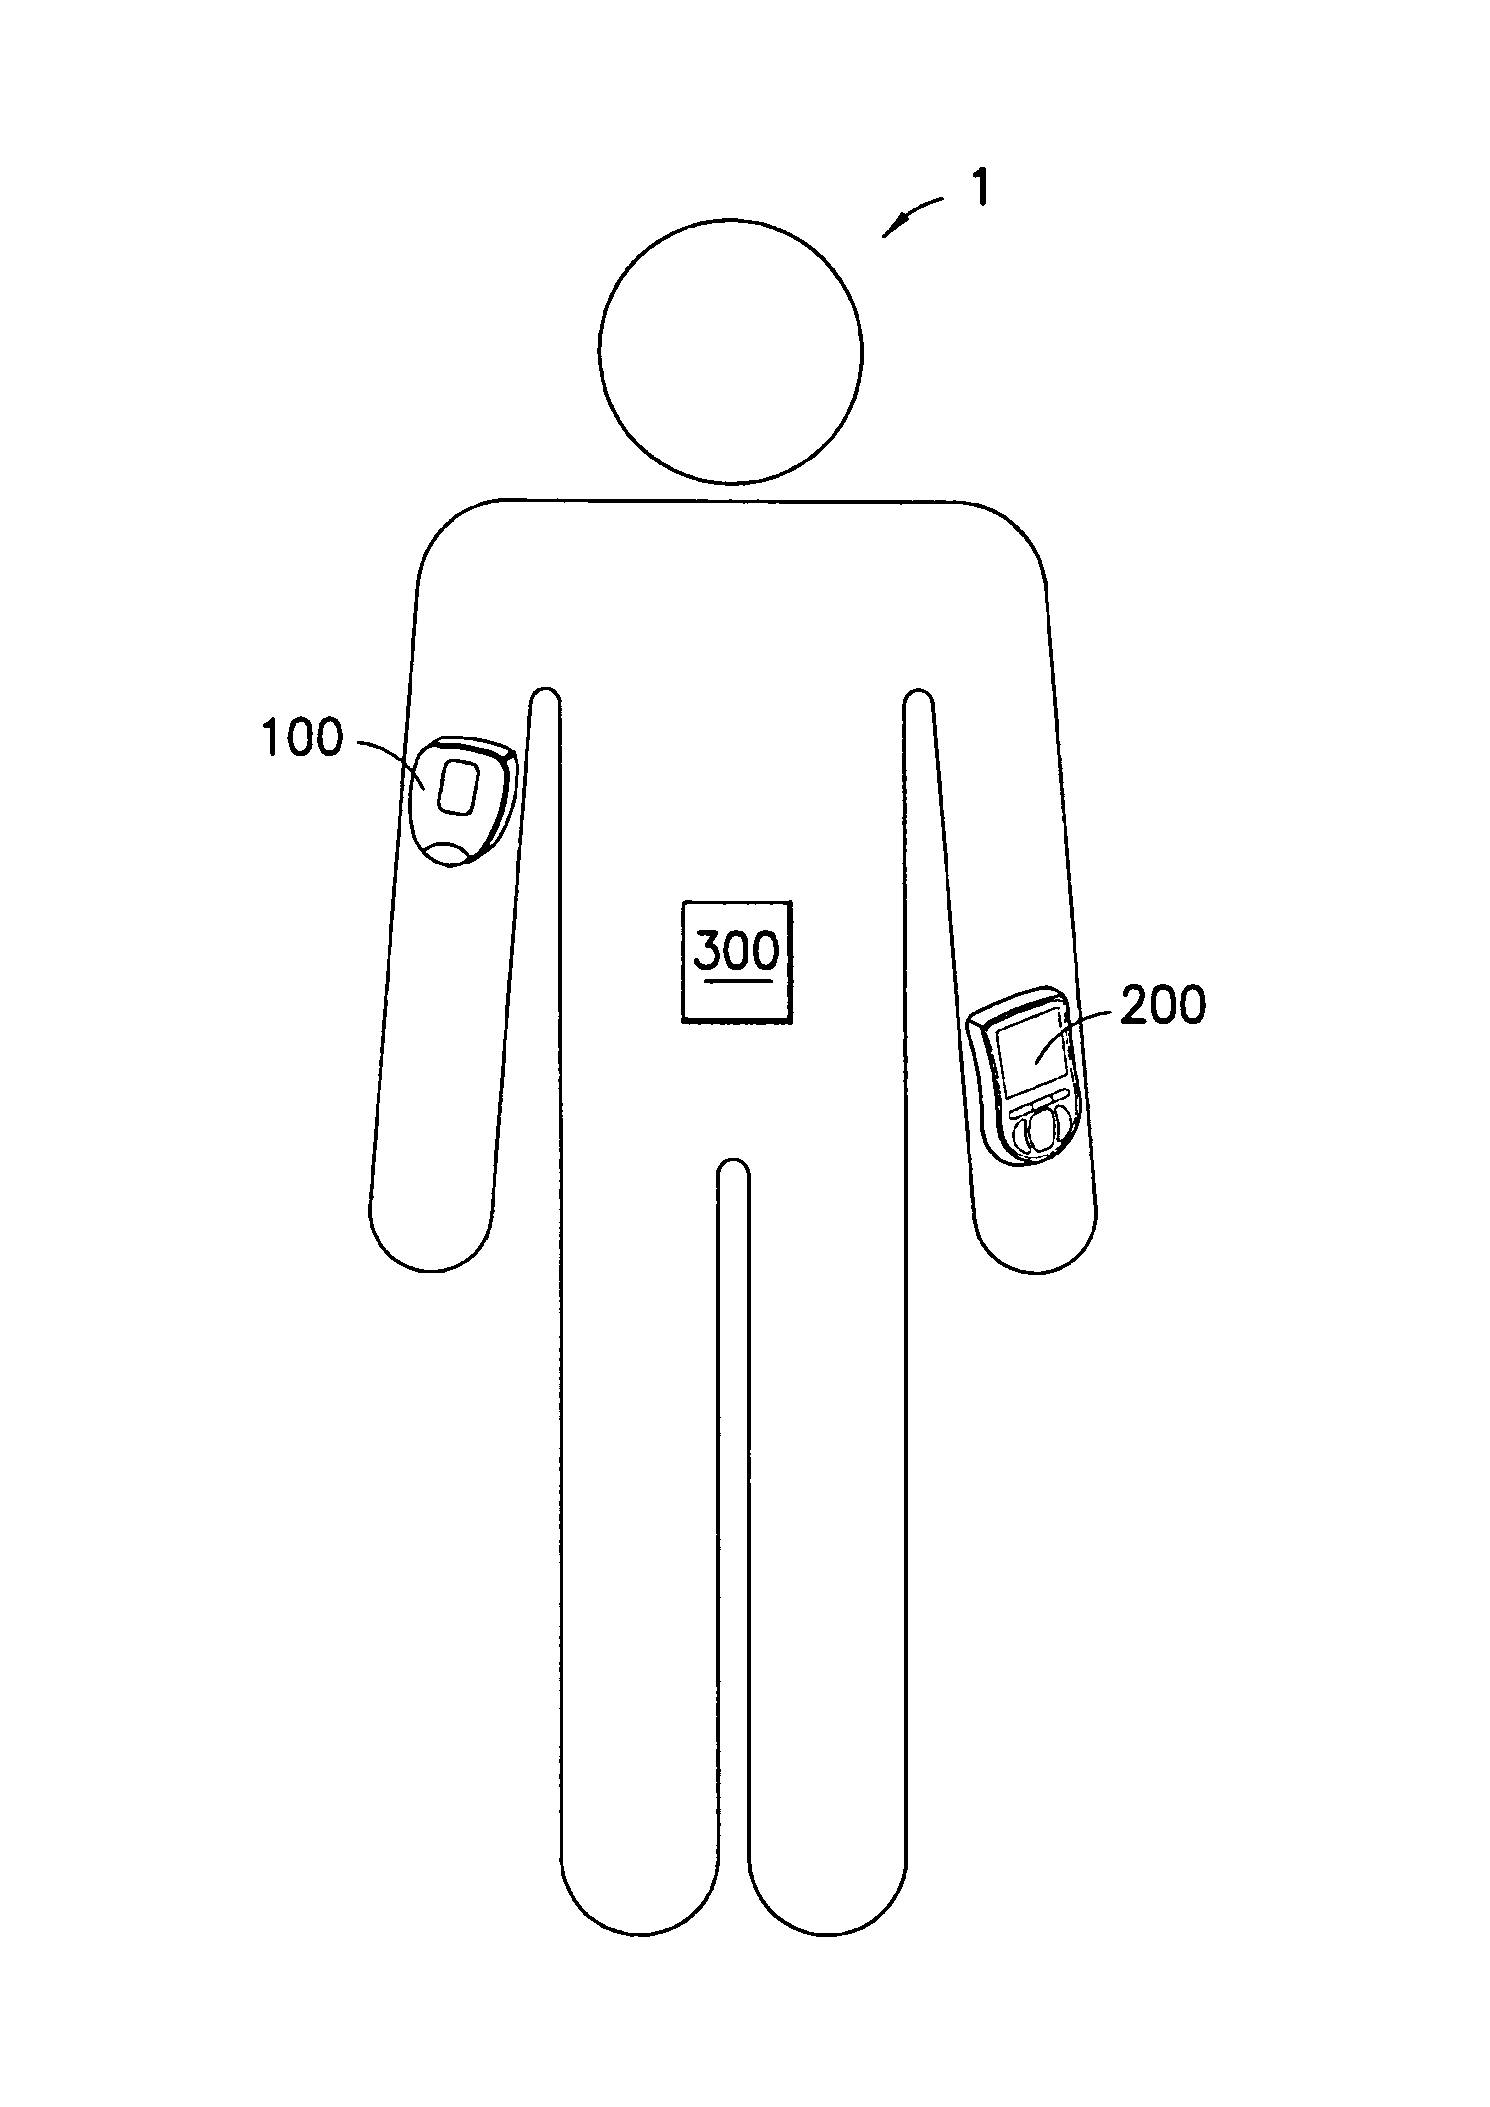 Medical device having capacitive coupling communication and energy harvesting